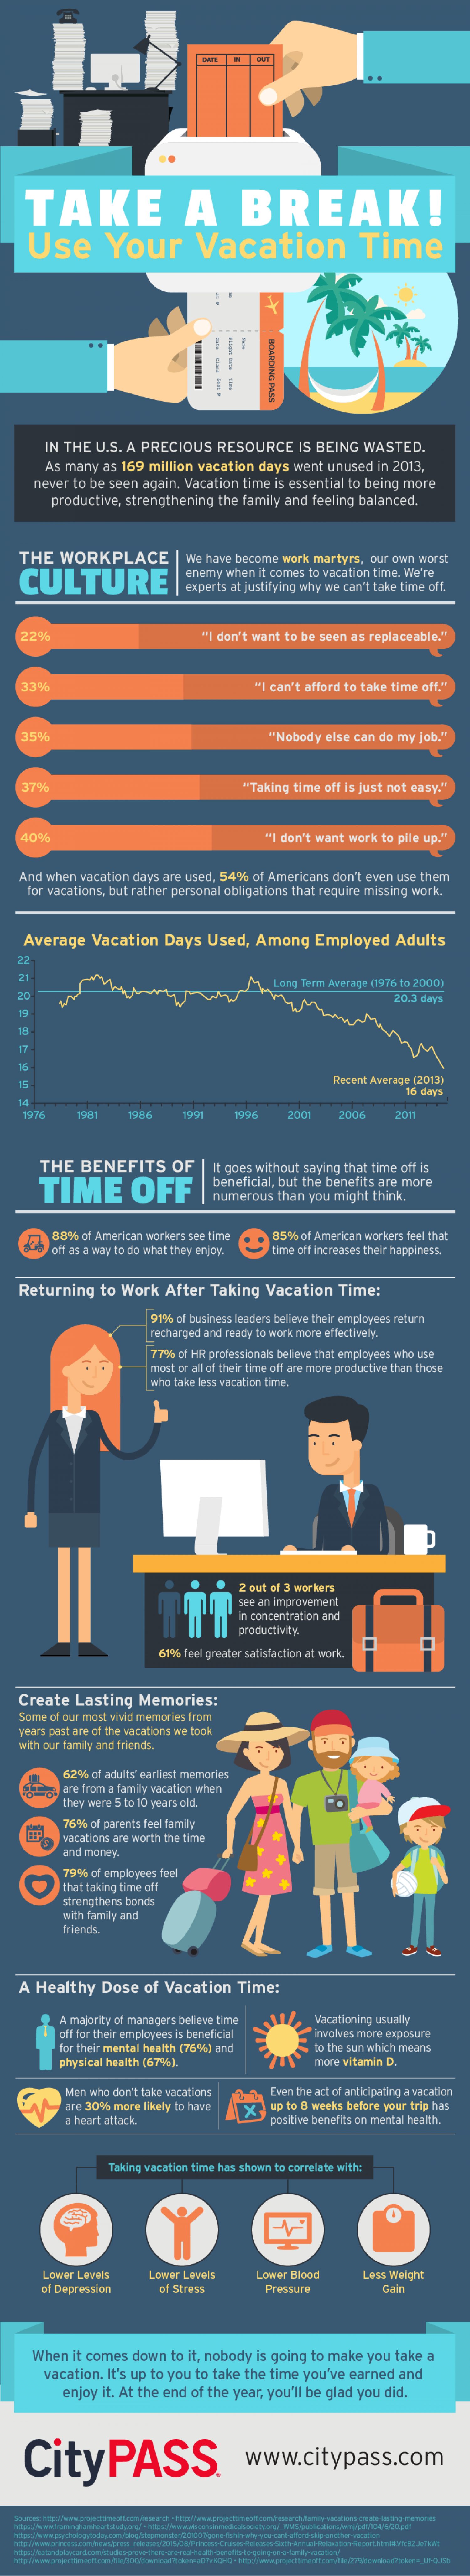 Take a Break! Use Your Vacation Time Infographic